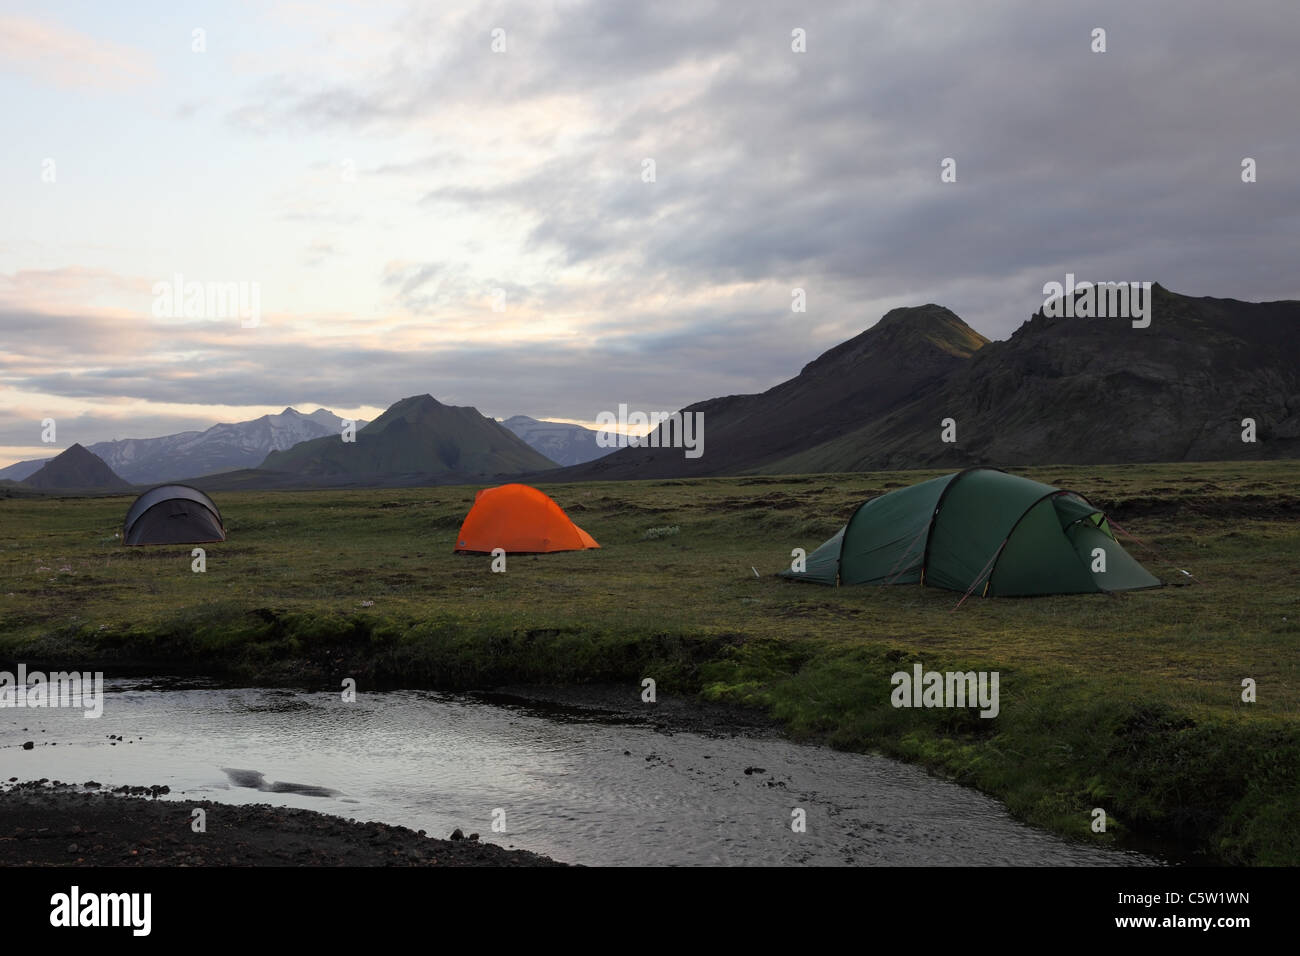 Tents at the Alftavatn Camping Area on the Laugavegur Hiking Trail Iceland  Stock Photo - Alamy